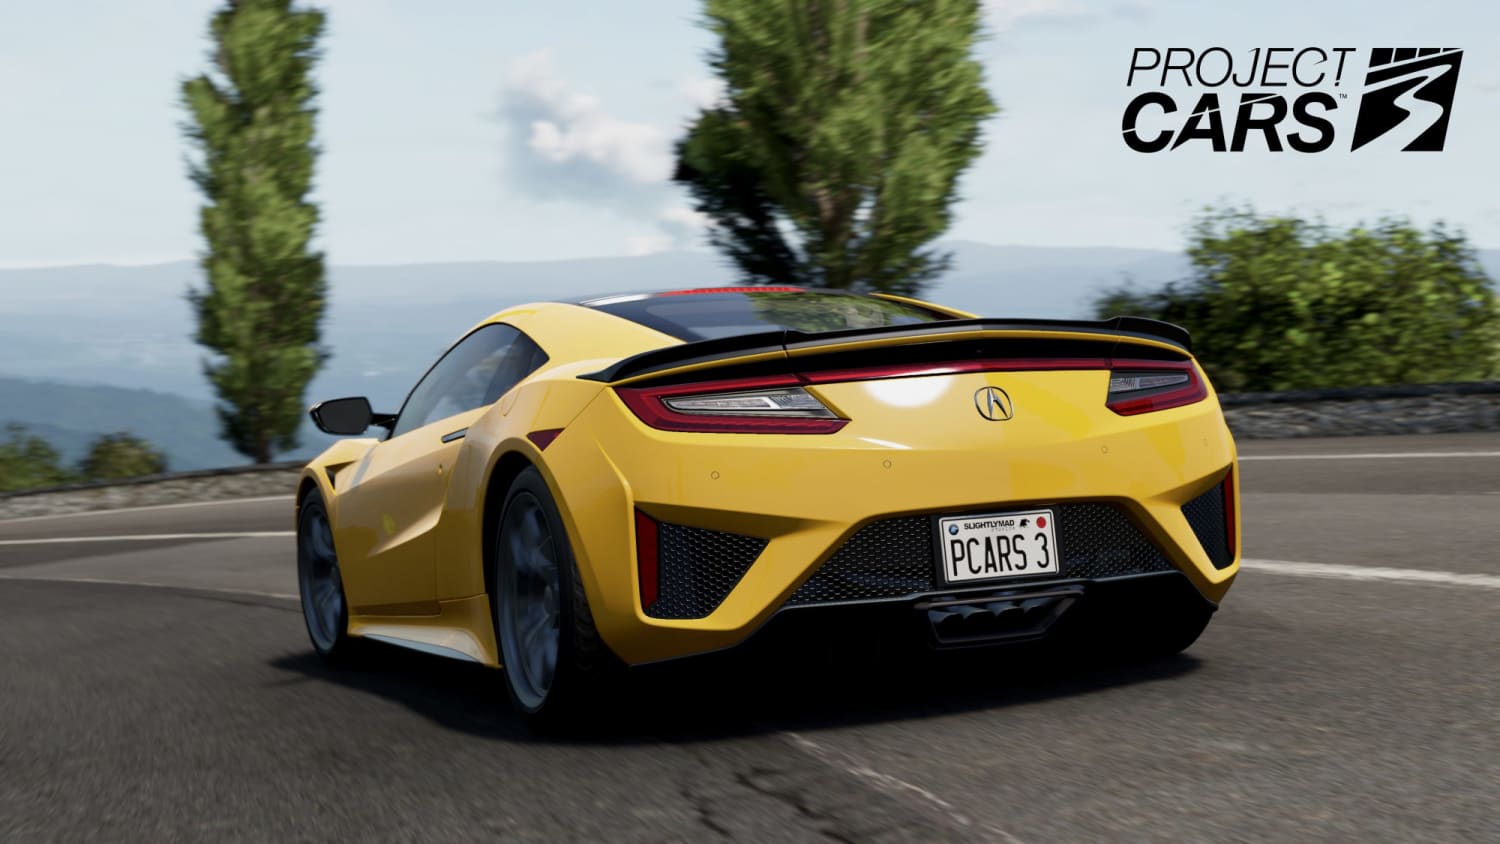 Project Cars 3 already has release date